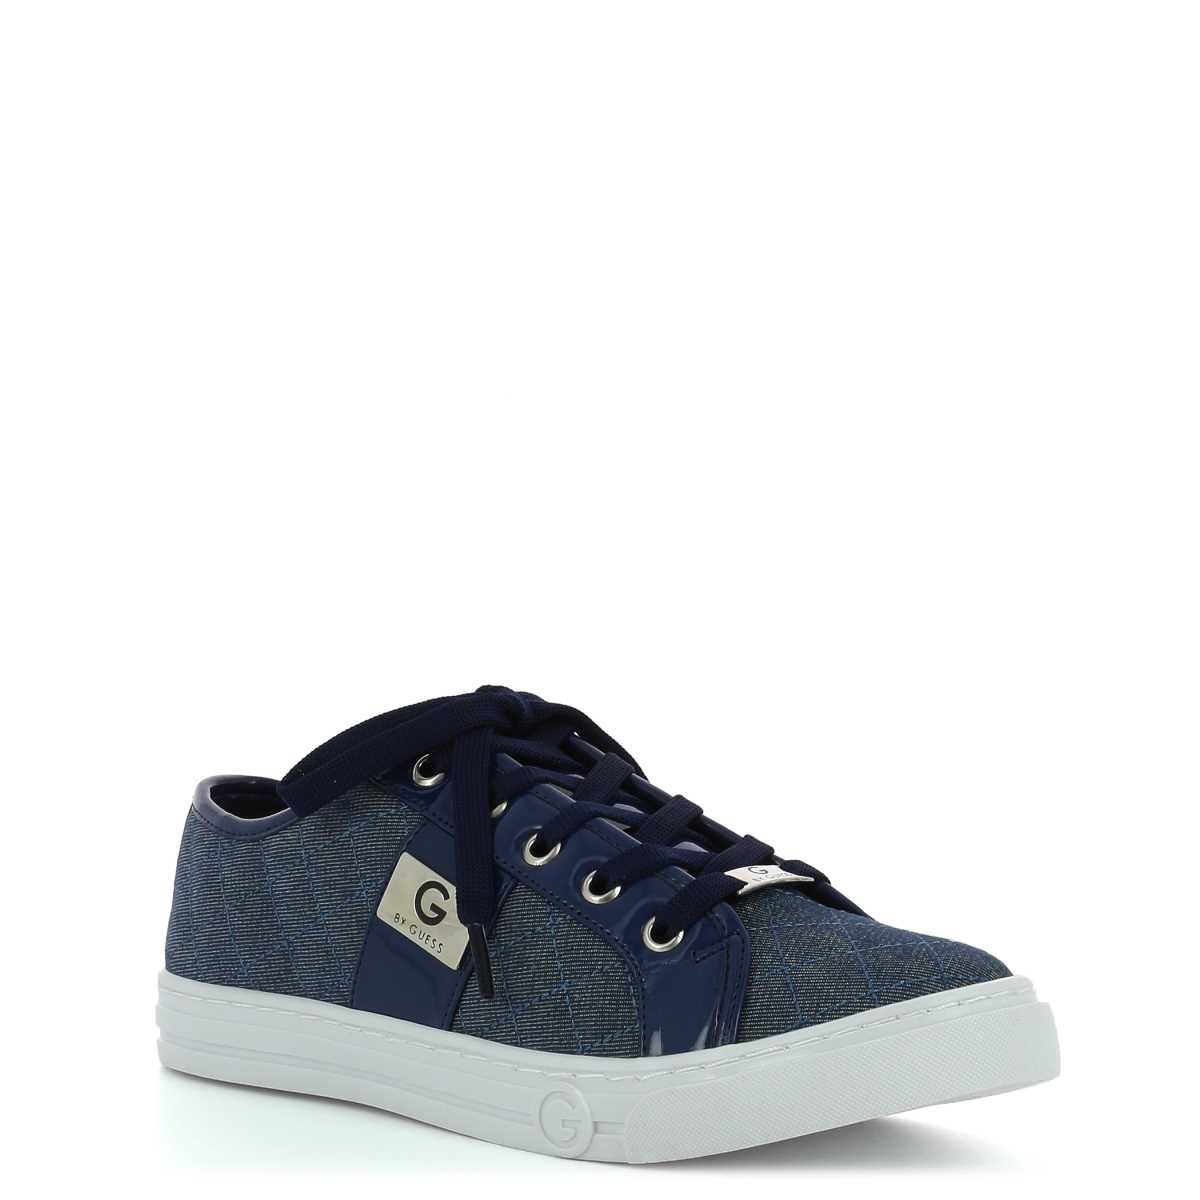 Tenis Spring Azul G By Guess